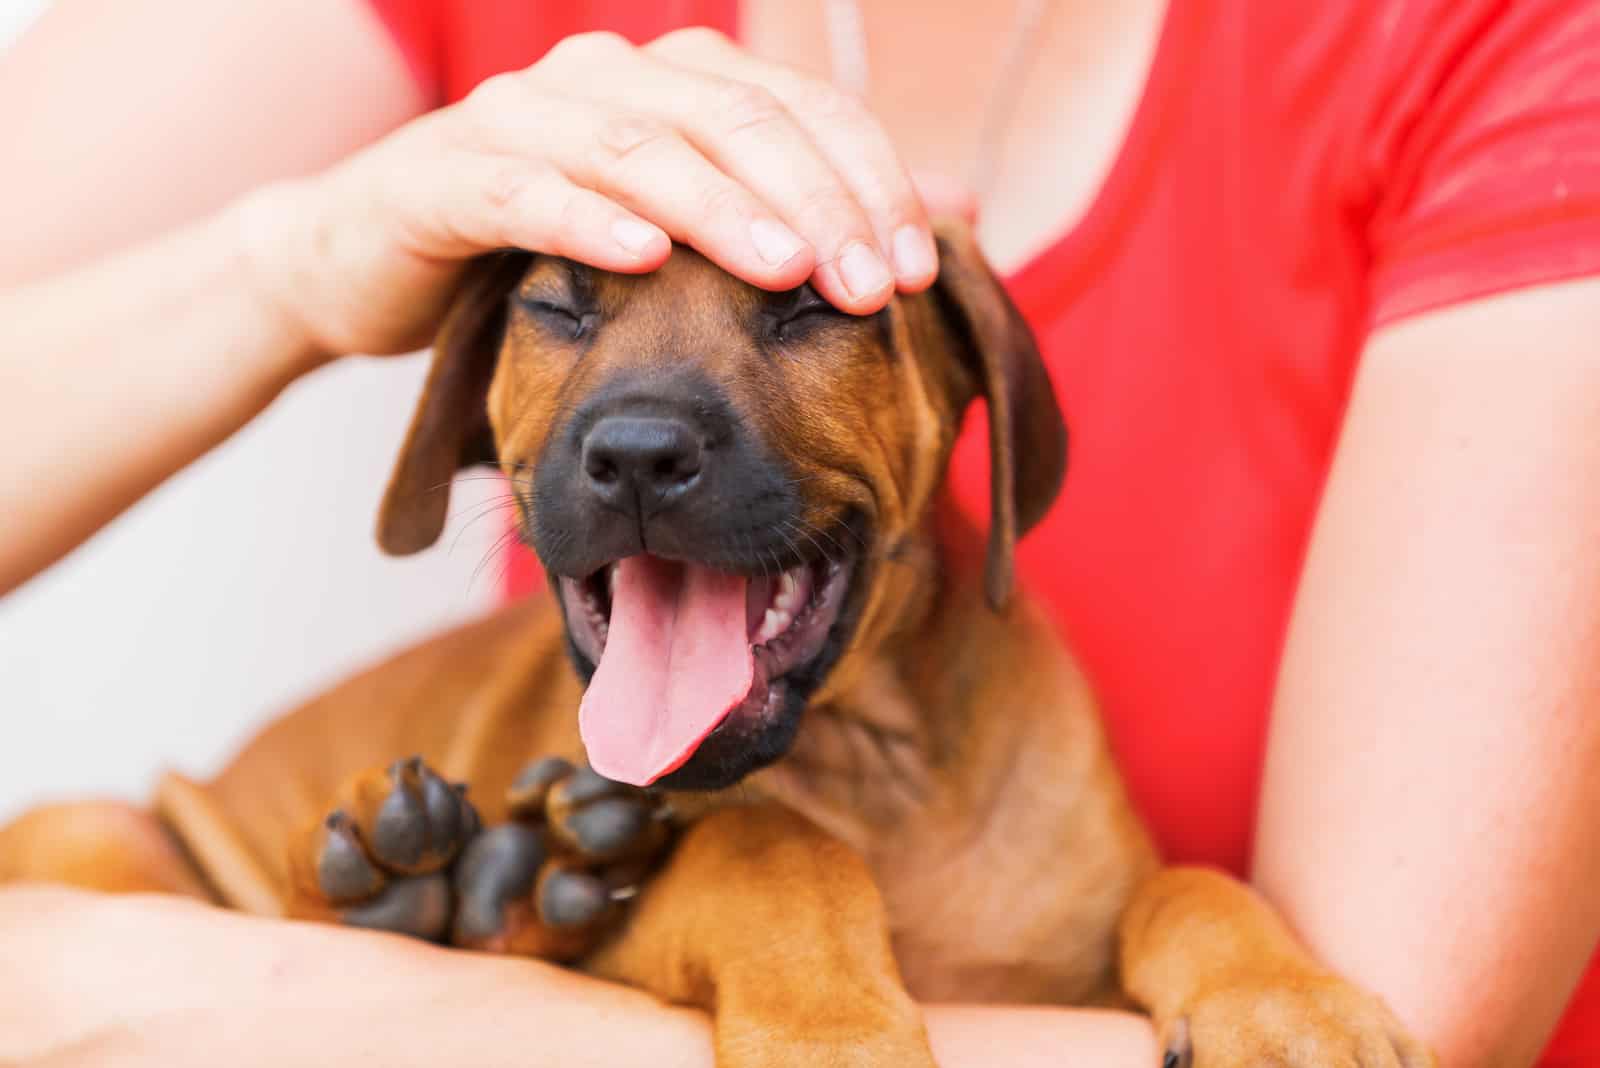 My Dog's Head Is Hot: 4 Common Causes & How To Help